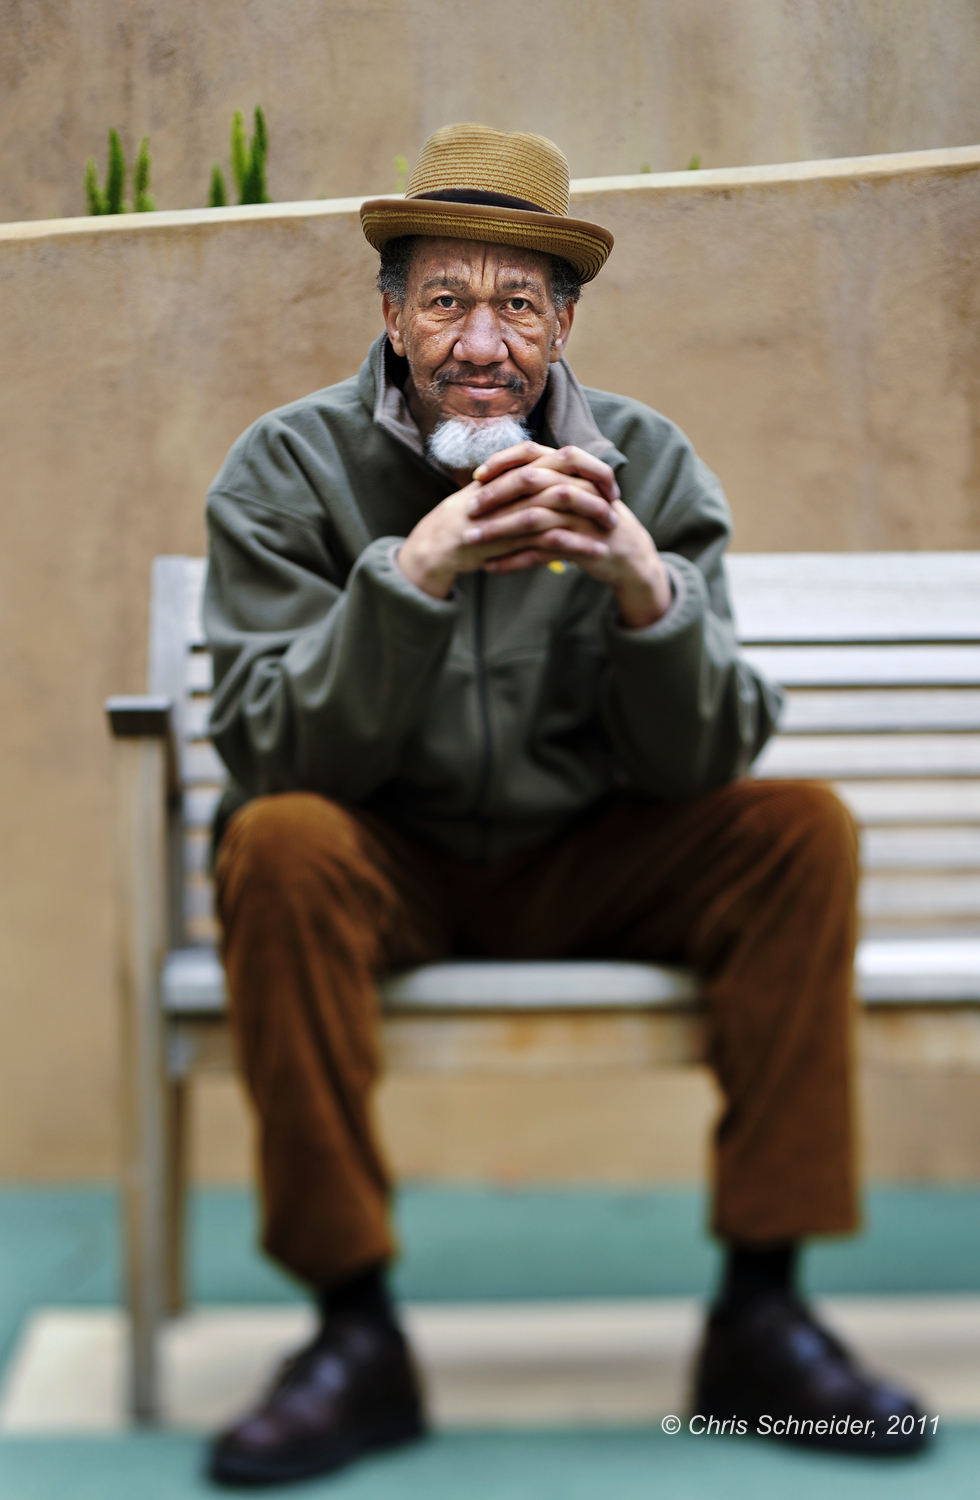 A portrait of a Mercy Housing resident outside his home in San Francisco for the Mercy Housing annual report.